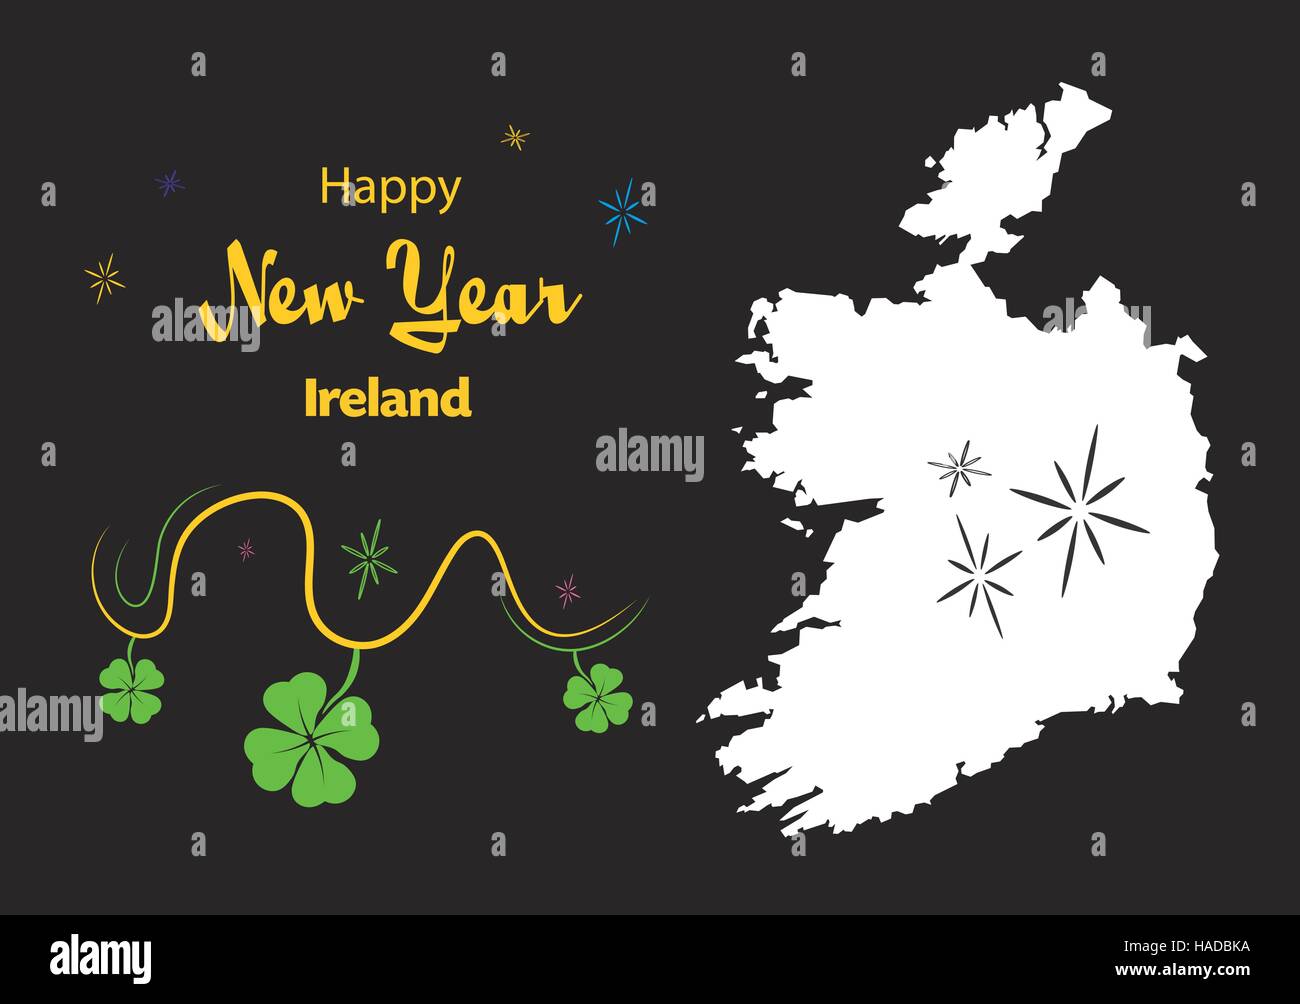 Happy New Year illustration theme with map of Ireland Stock Vector